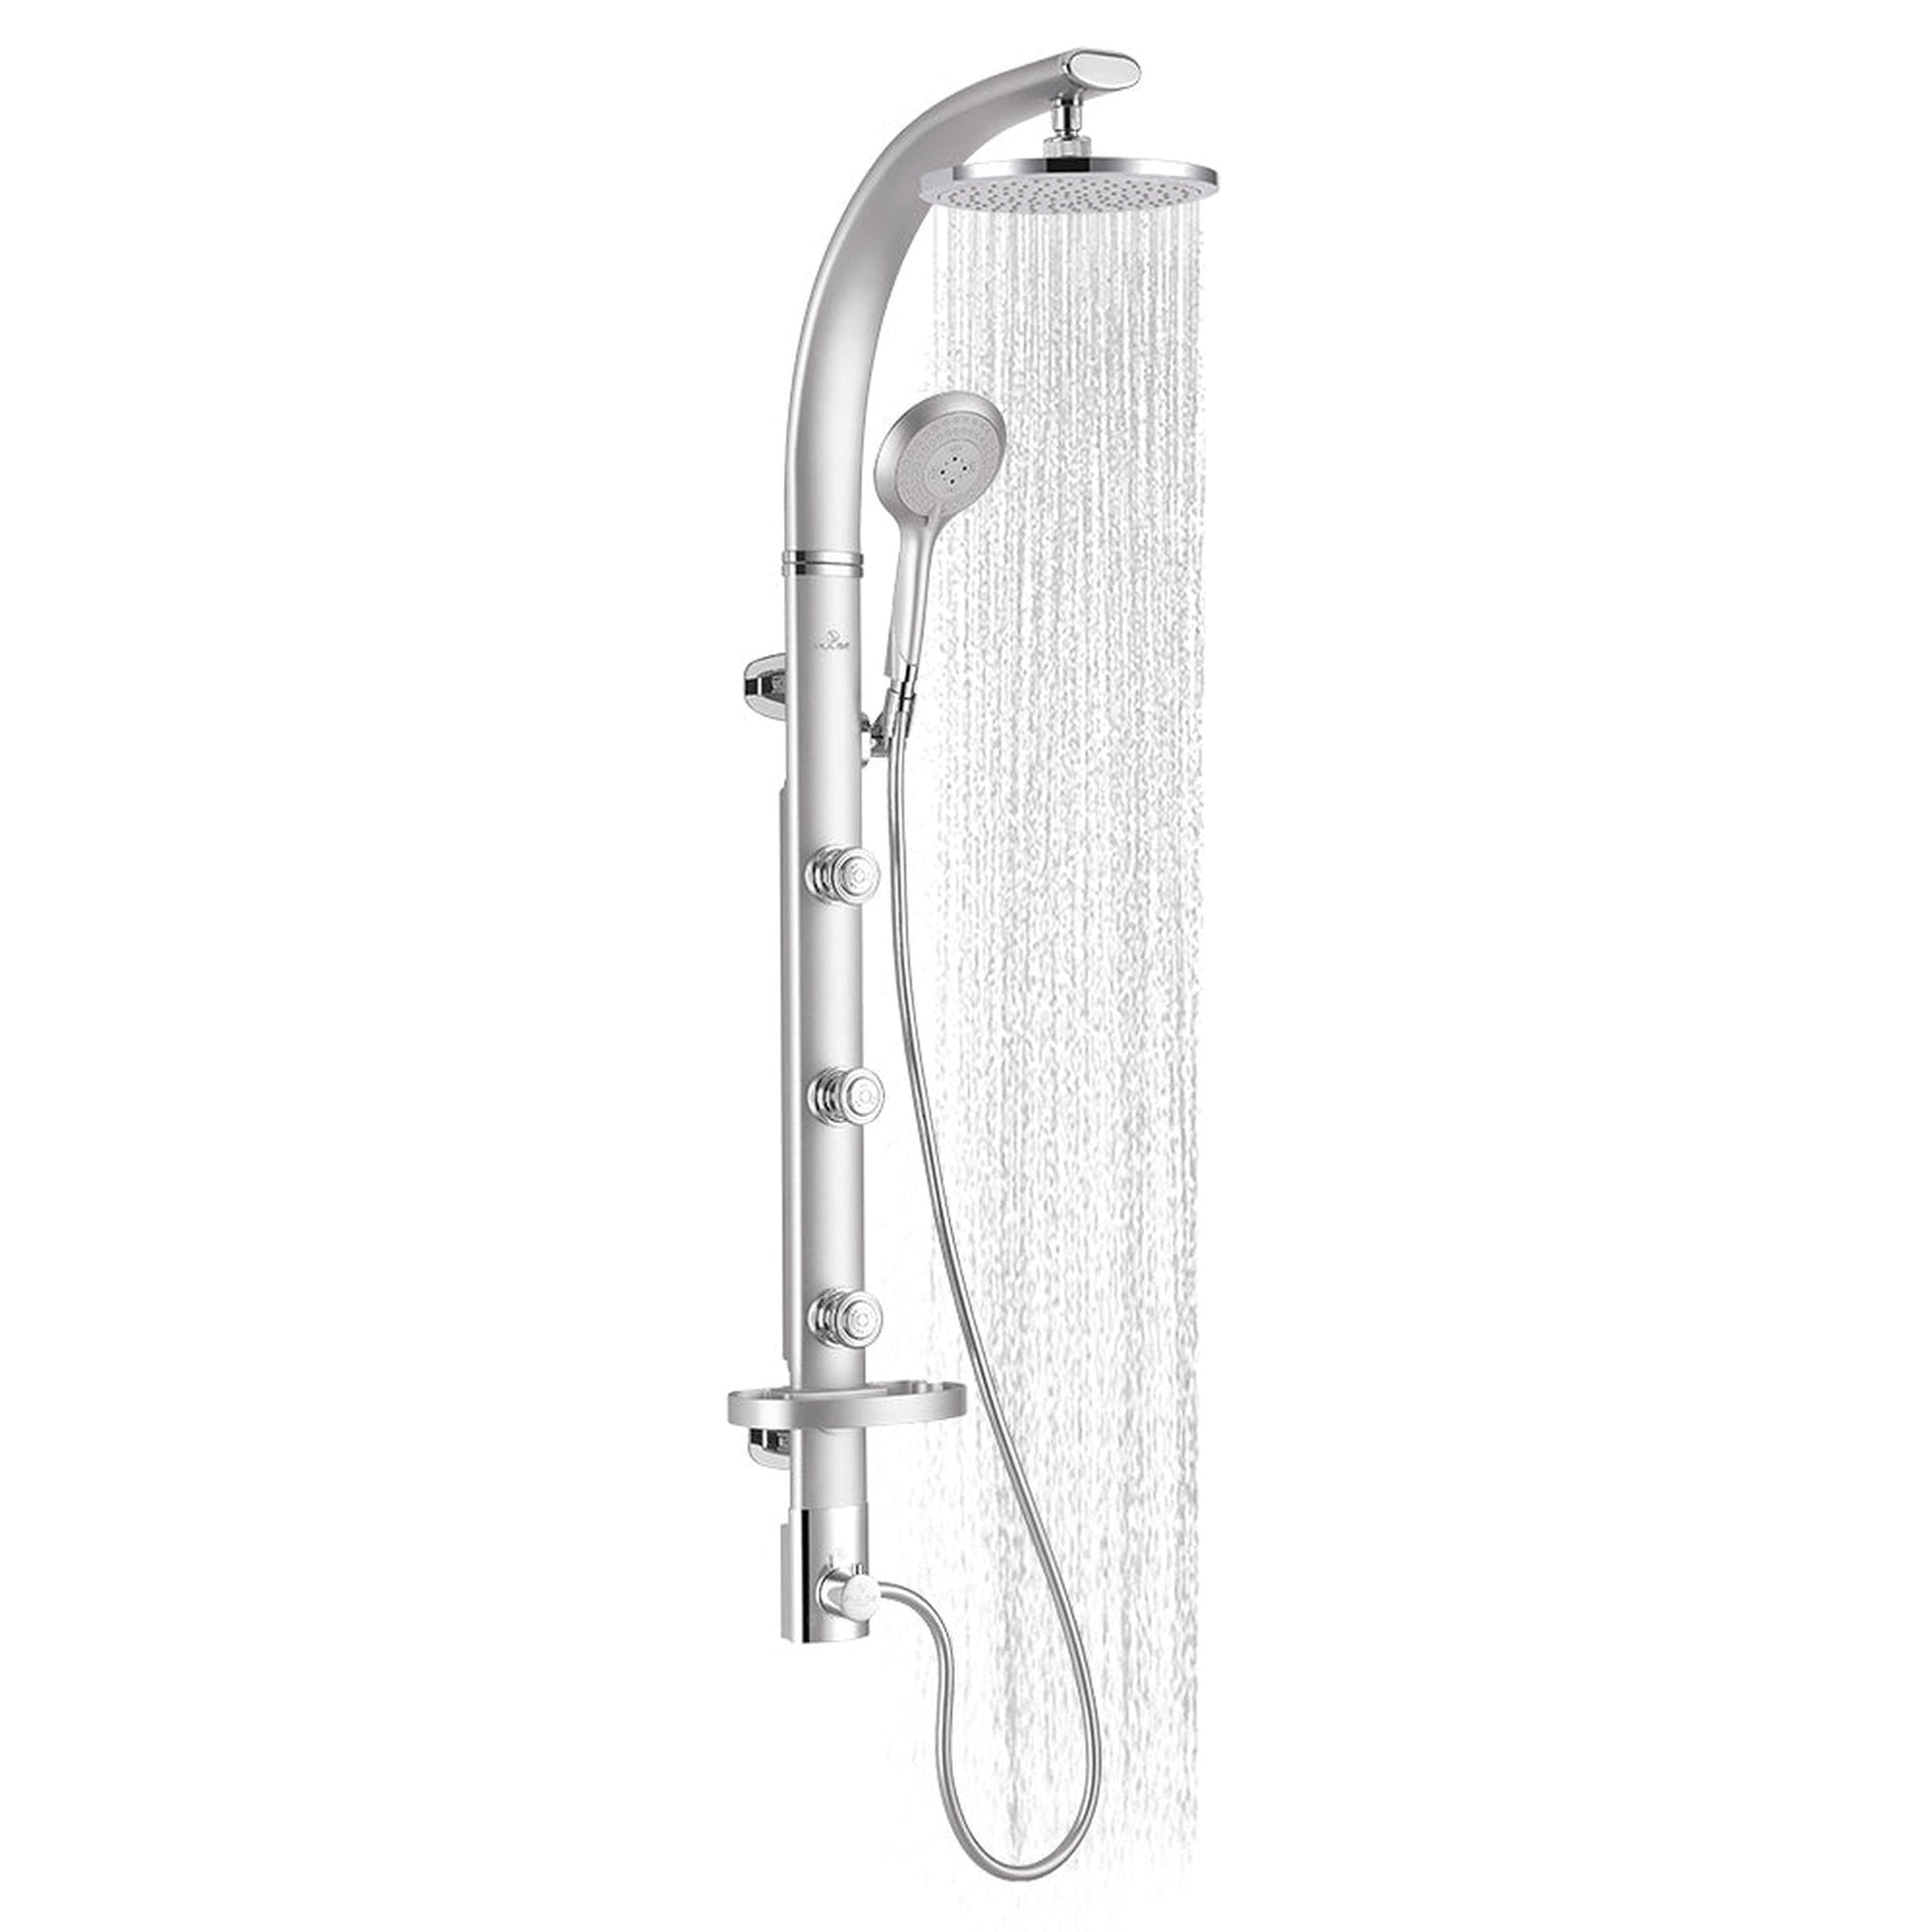 PULSE ShowerSpas Bonzai 2.5 GPM Rain Shower System in Silver Aluminum Finish With 3-Body Jet and 5-Function Hand Shower